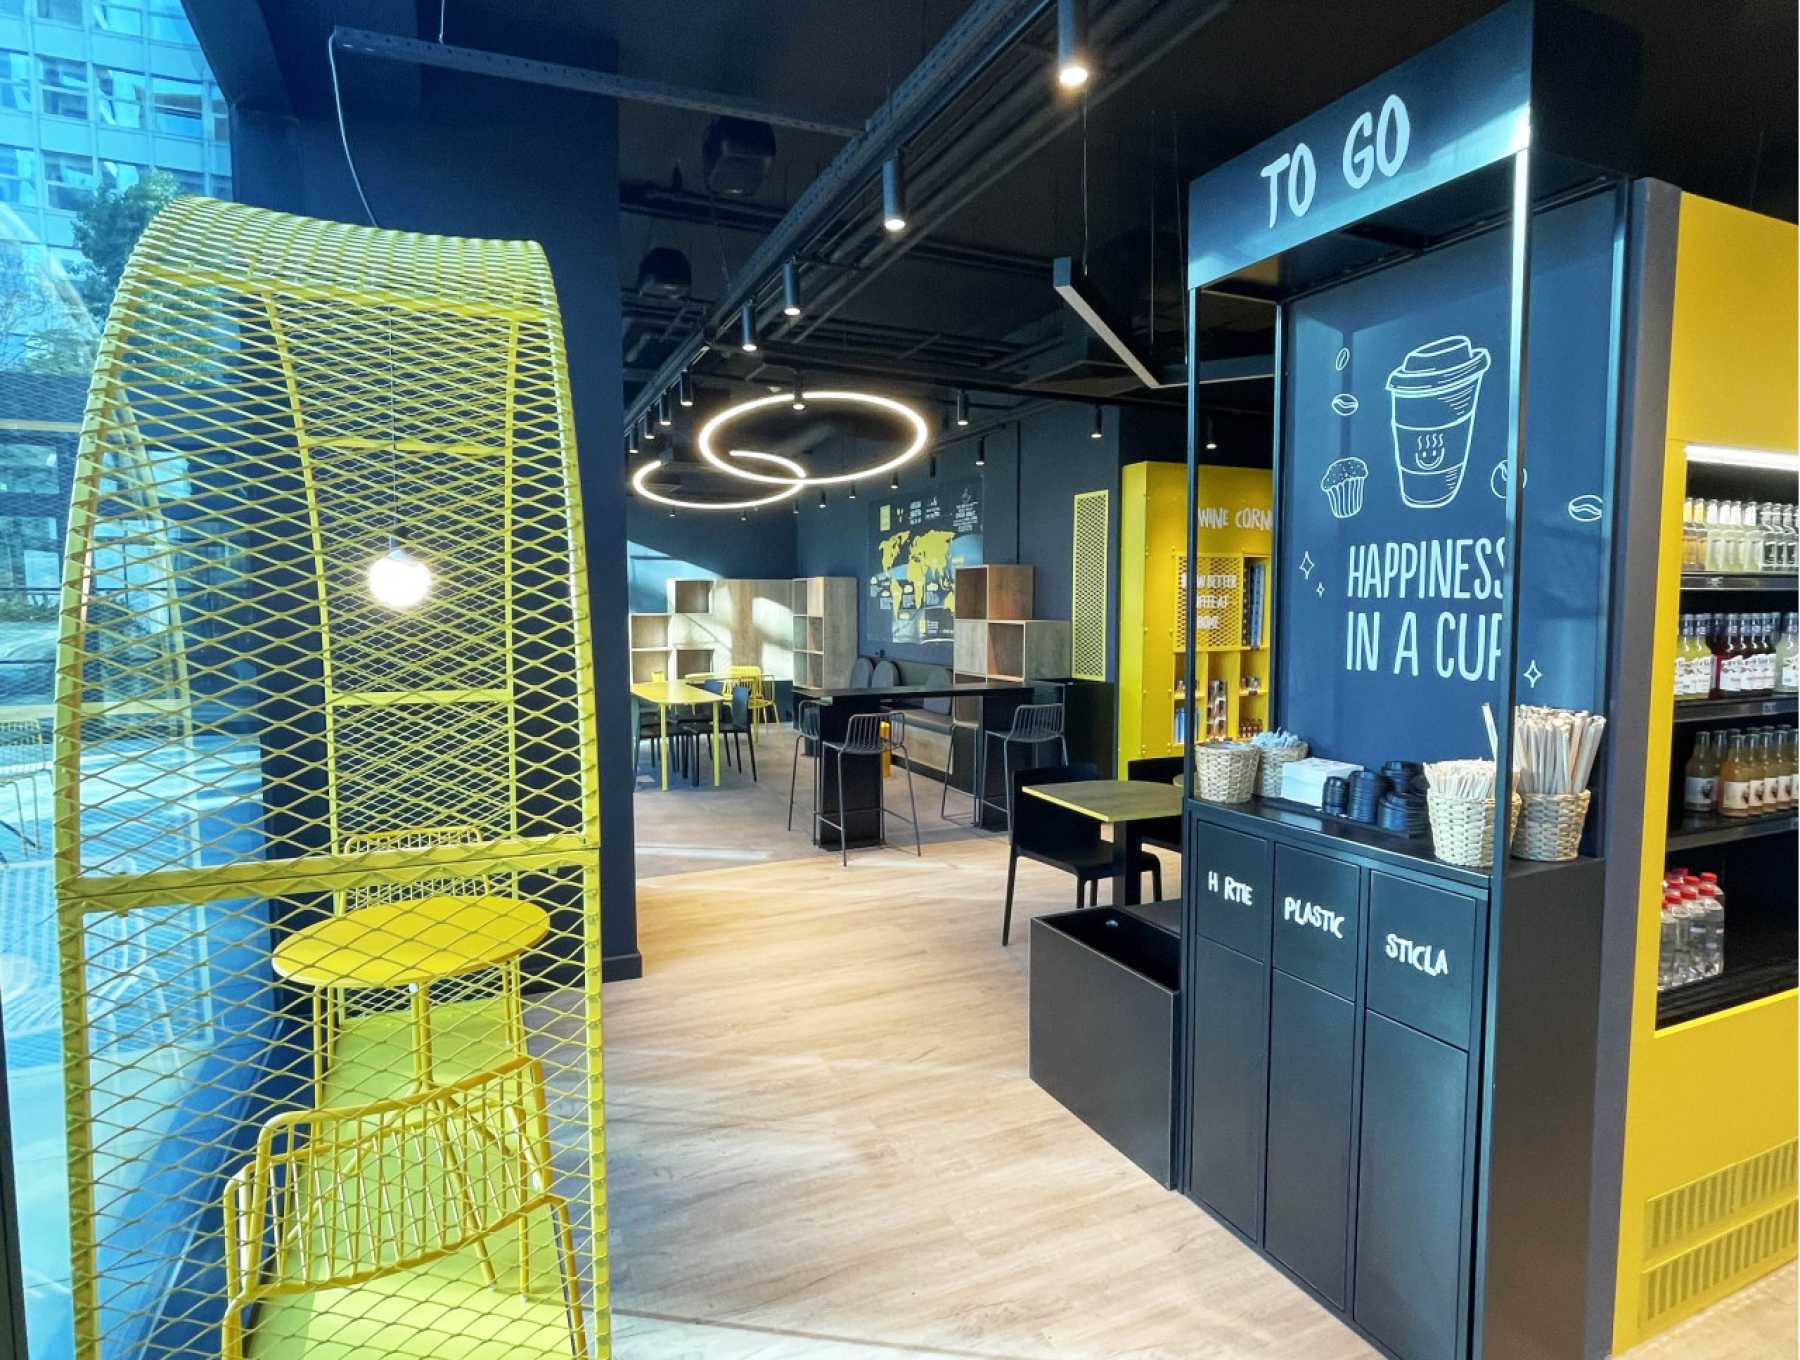 Ted’s Coffee has opened a cafe on the ground floor of the One Tower